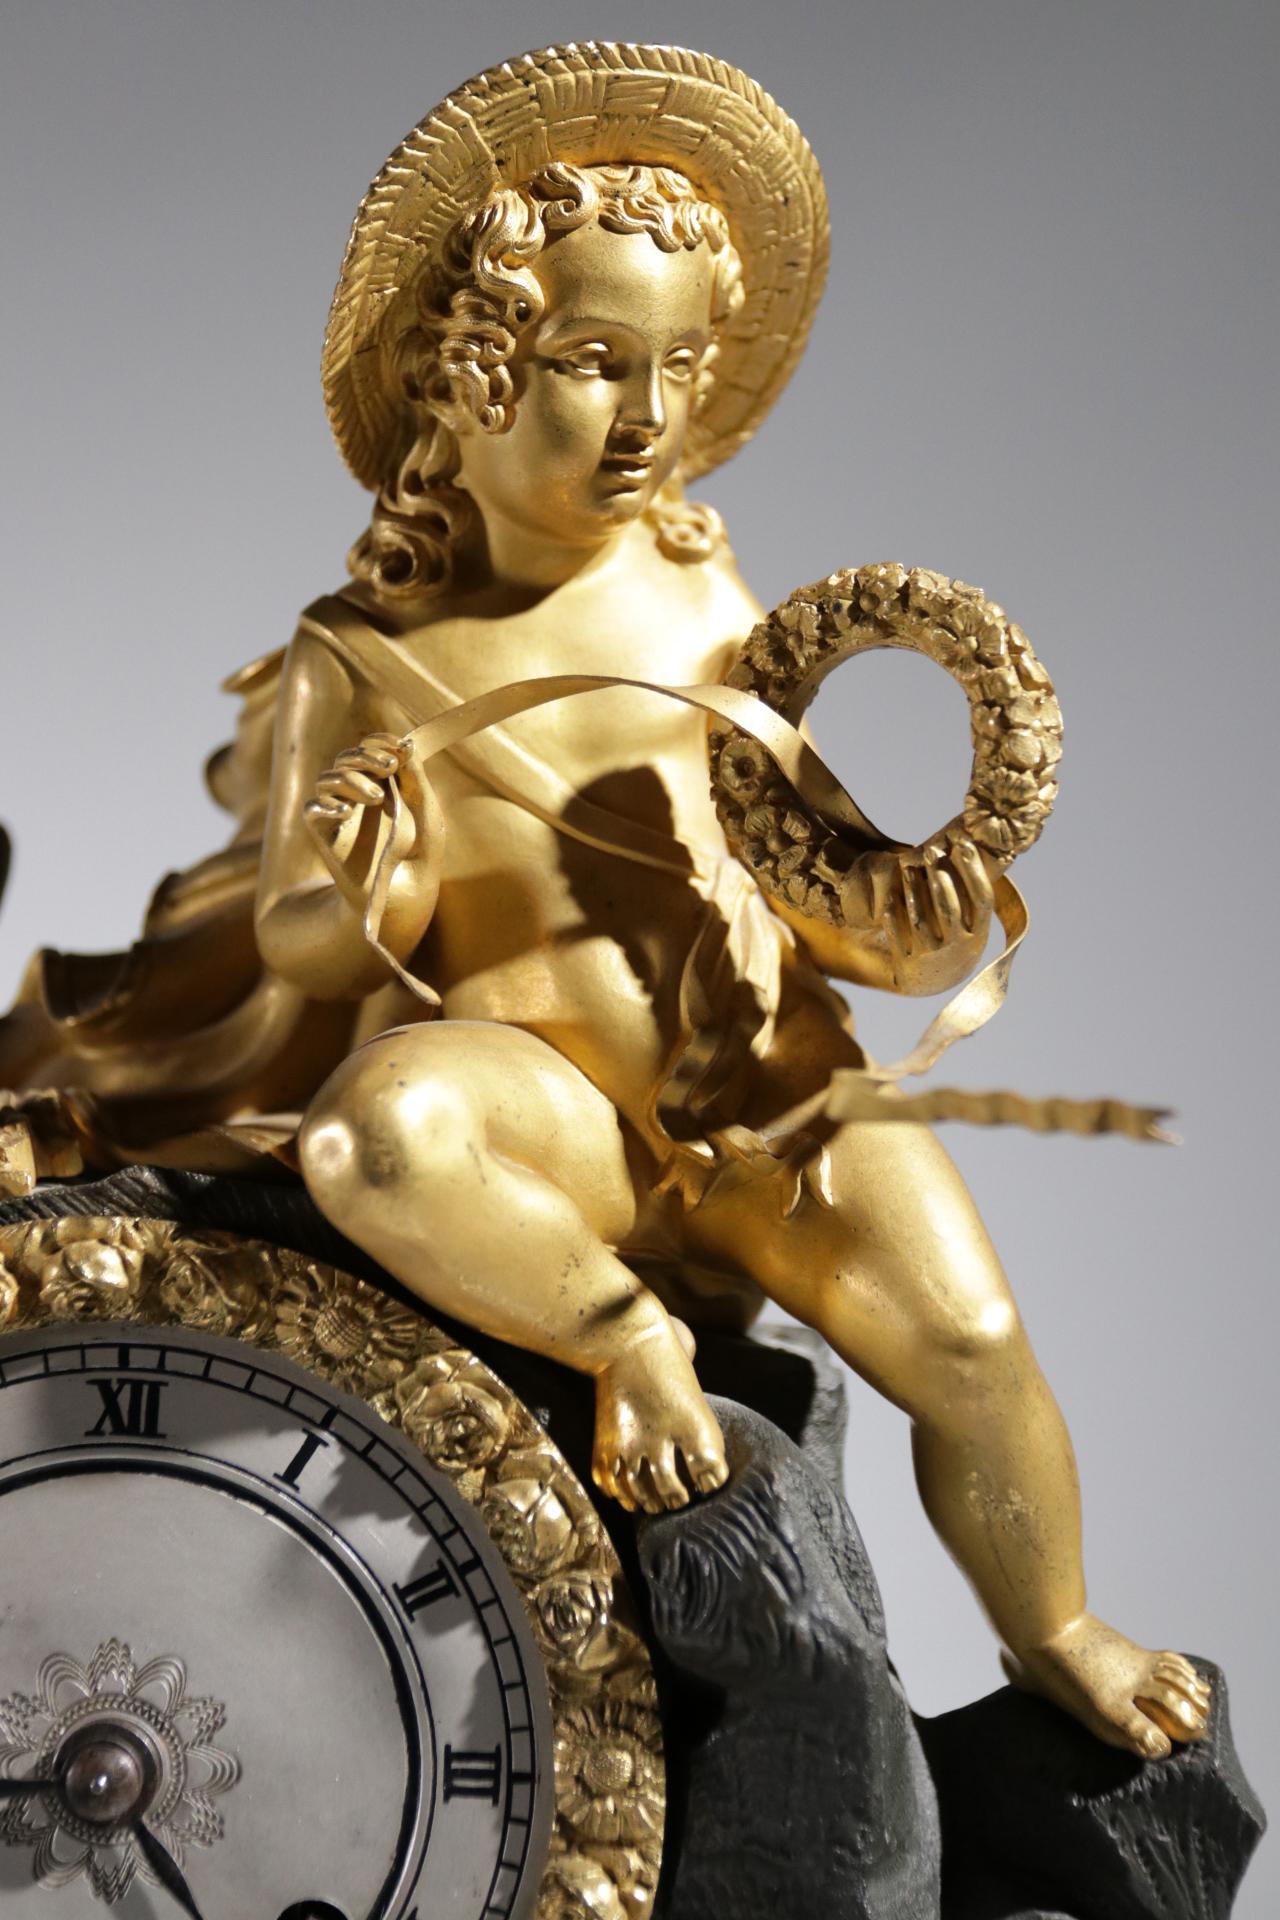 Beautiful fire gilded Empire mantel clock with a shepherdess on top with a wreath and ribbon. On the left a staff with pan flute.
At the bottom of the clock acanthus leaves, wreaths and again a staff with pan flute.
The dial has been re-silvered